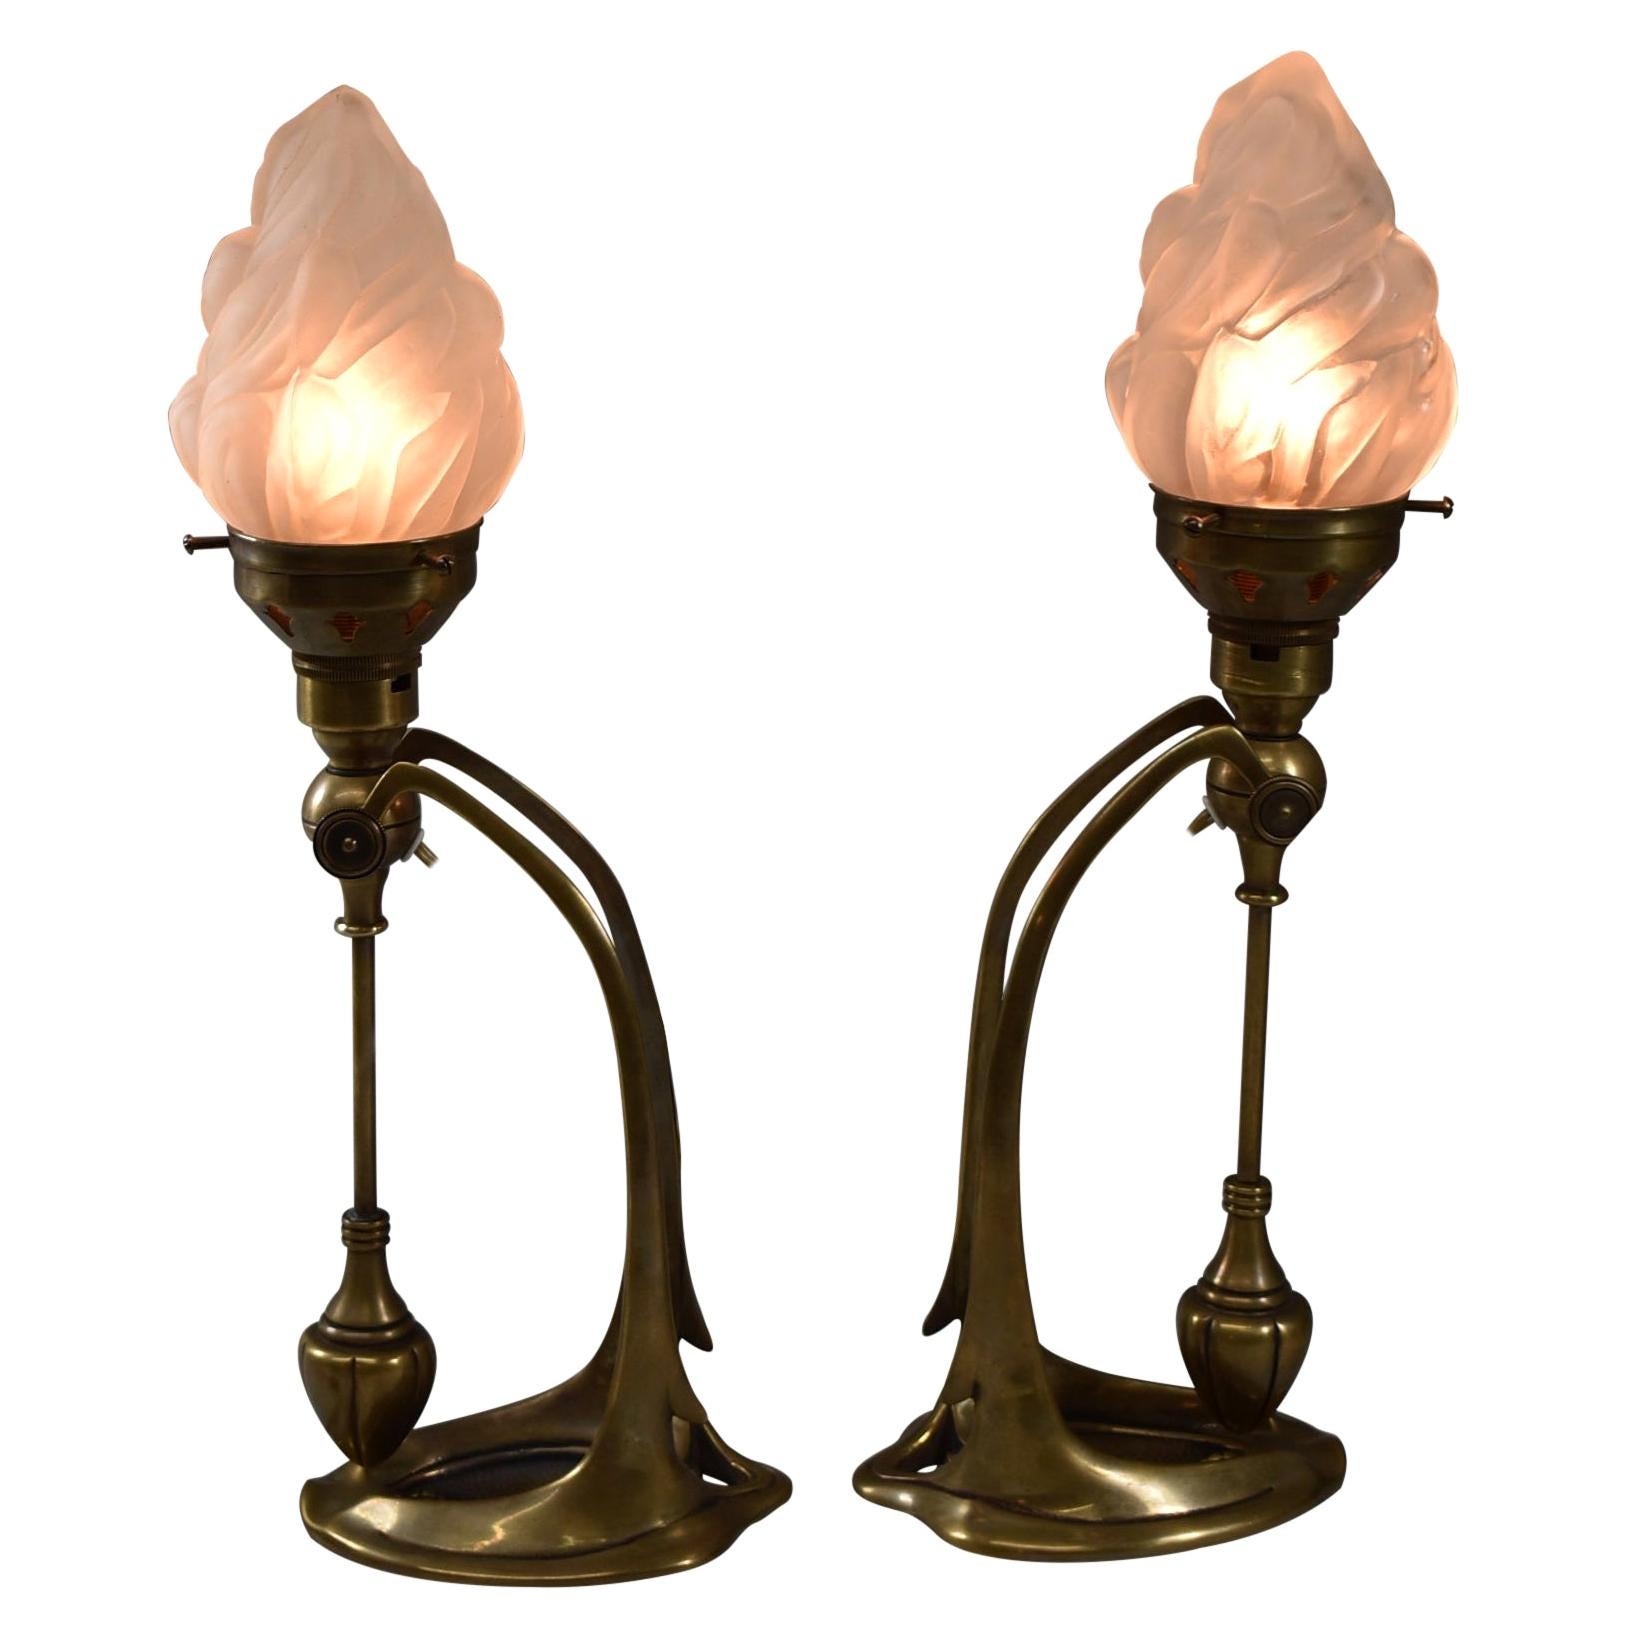 Art Nouveau Style Pair of Bronze Mantle Lamps Vintage Flame Opaque Glass Shade